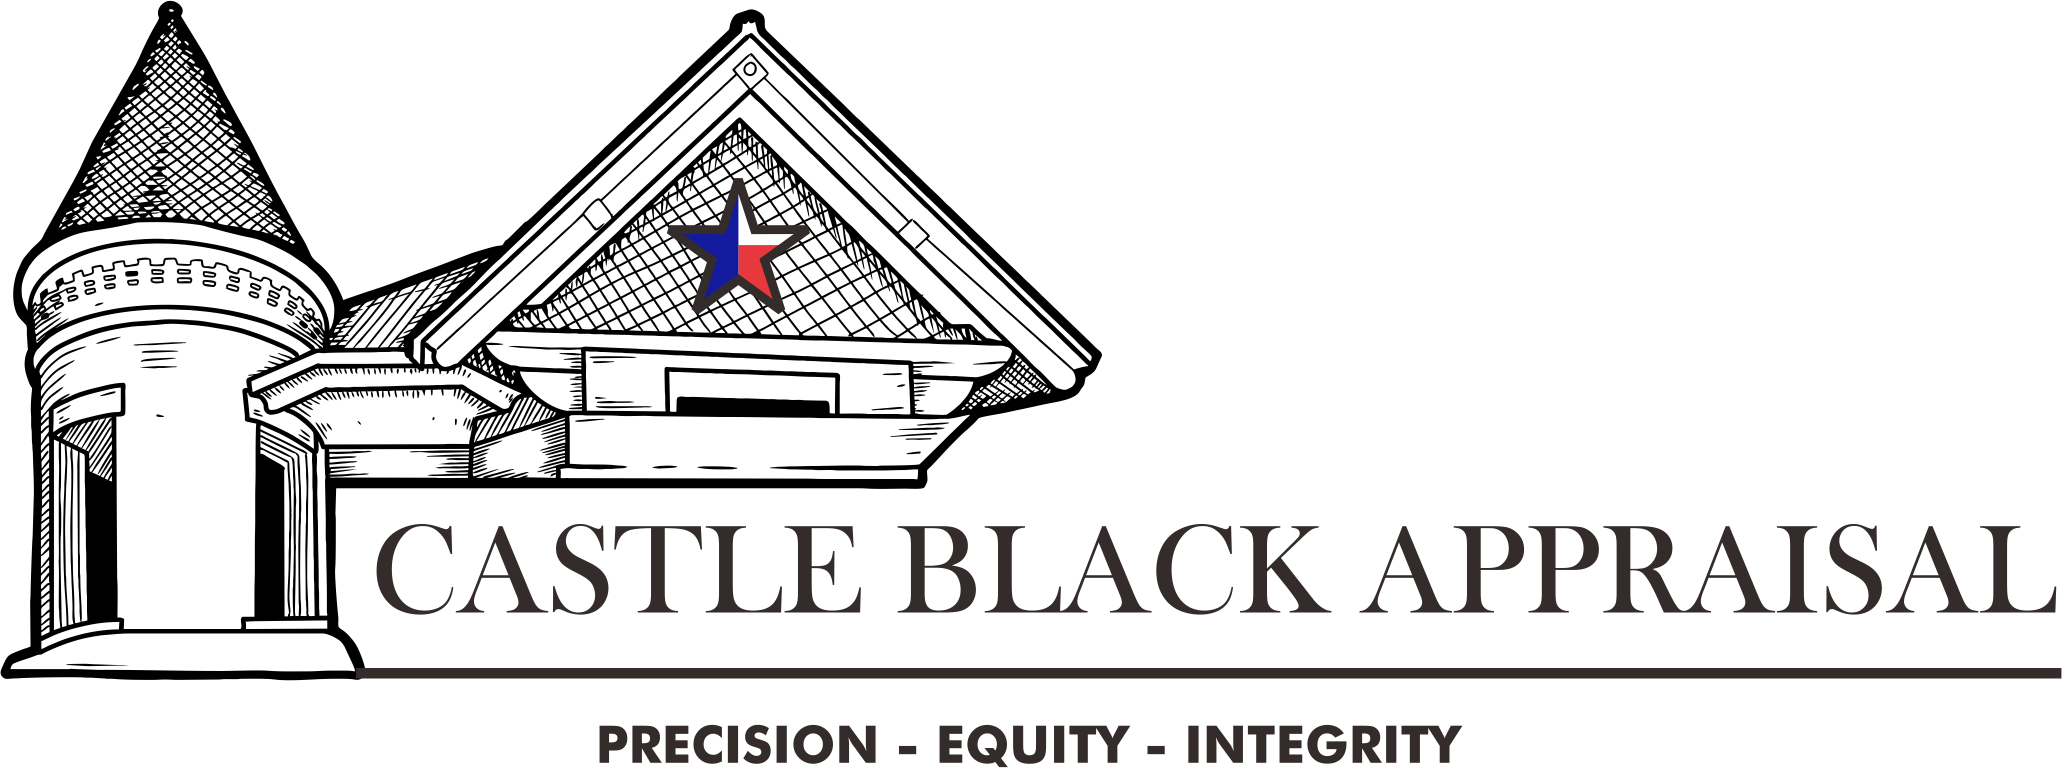 Castle Black Appraisal TX – Accurate Appraisals, Timely Results